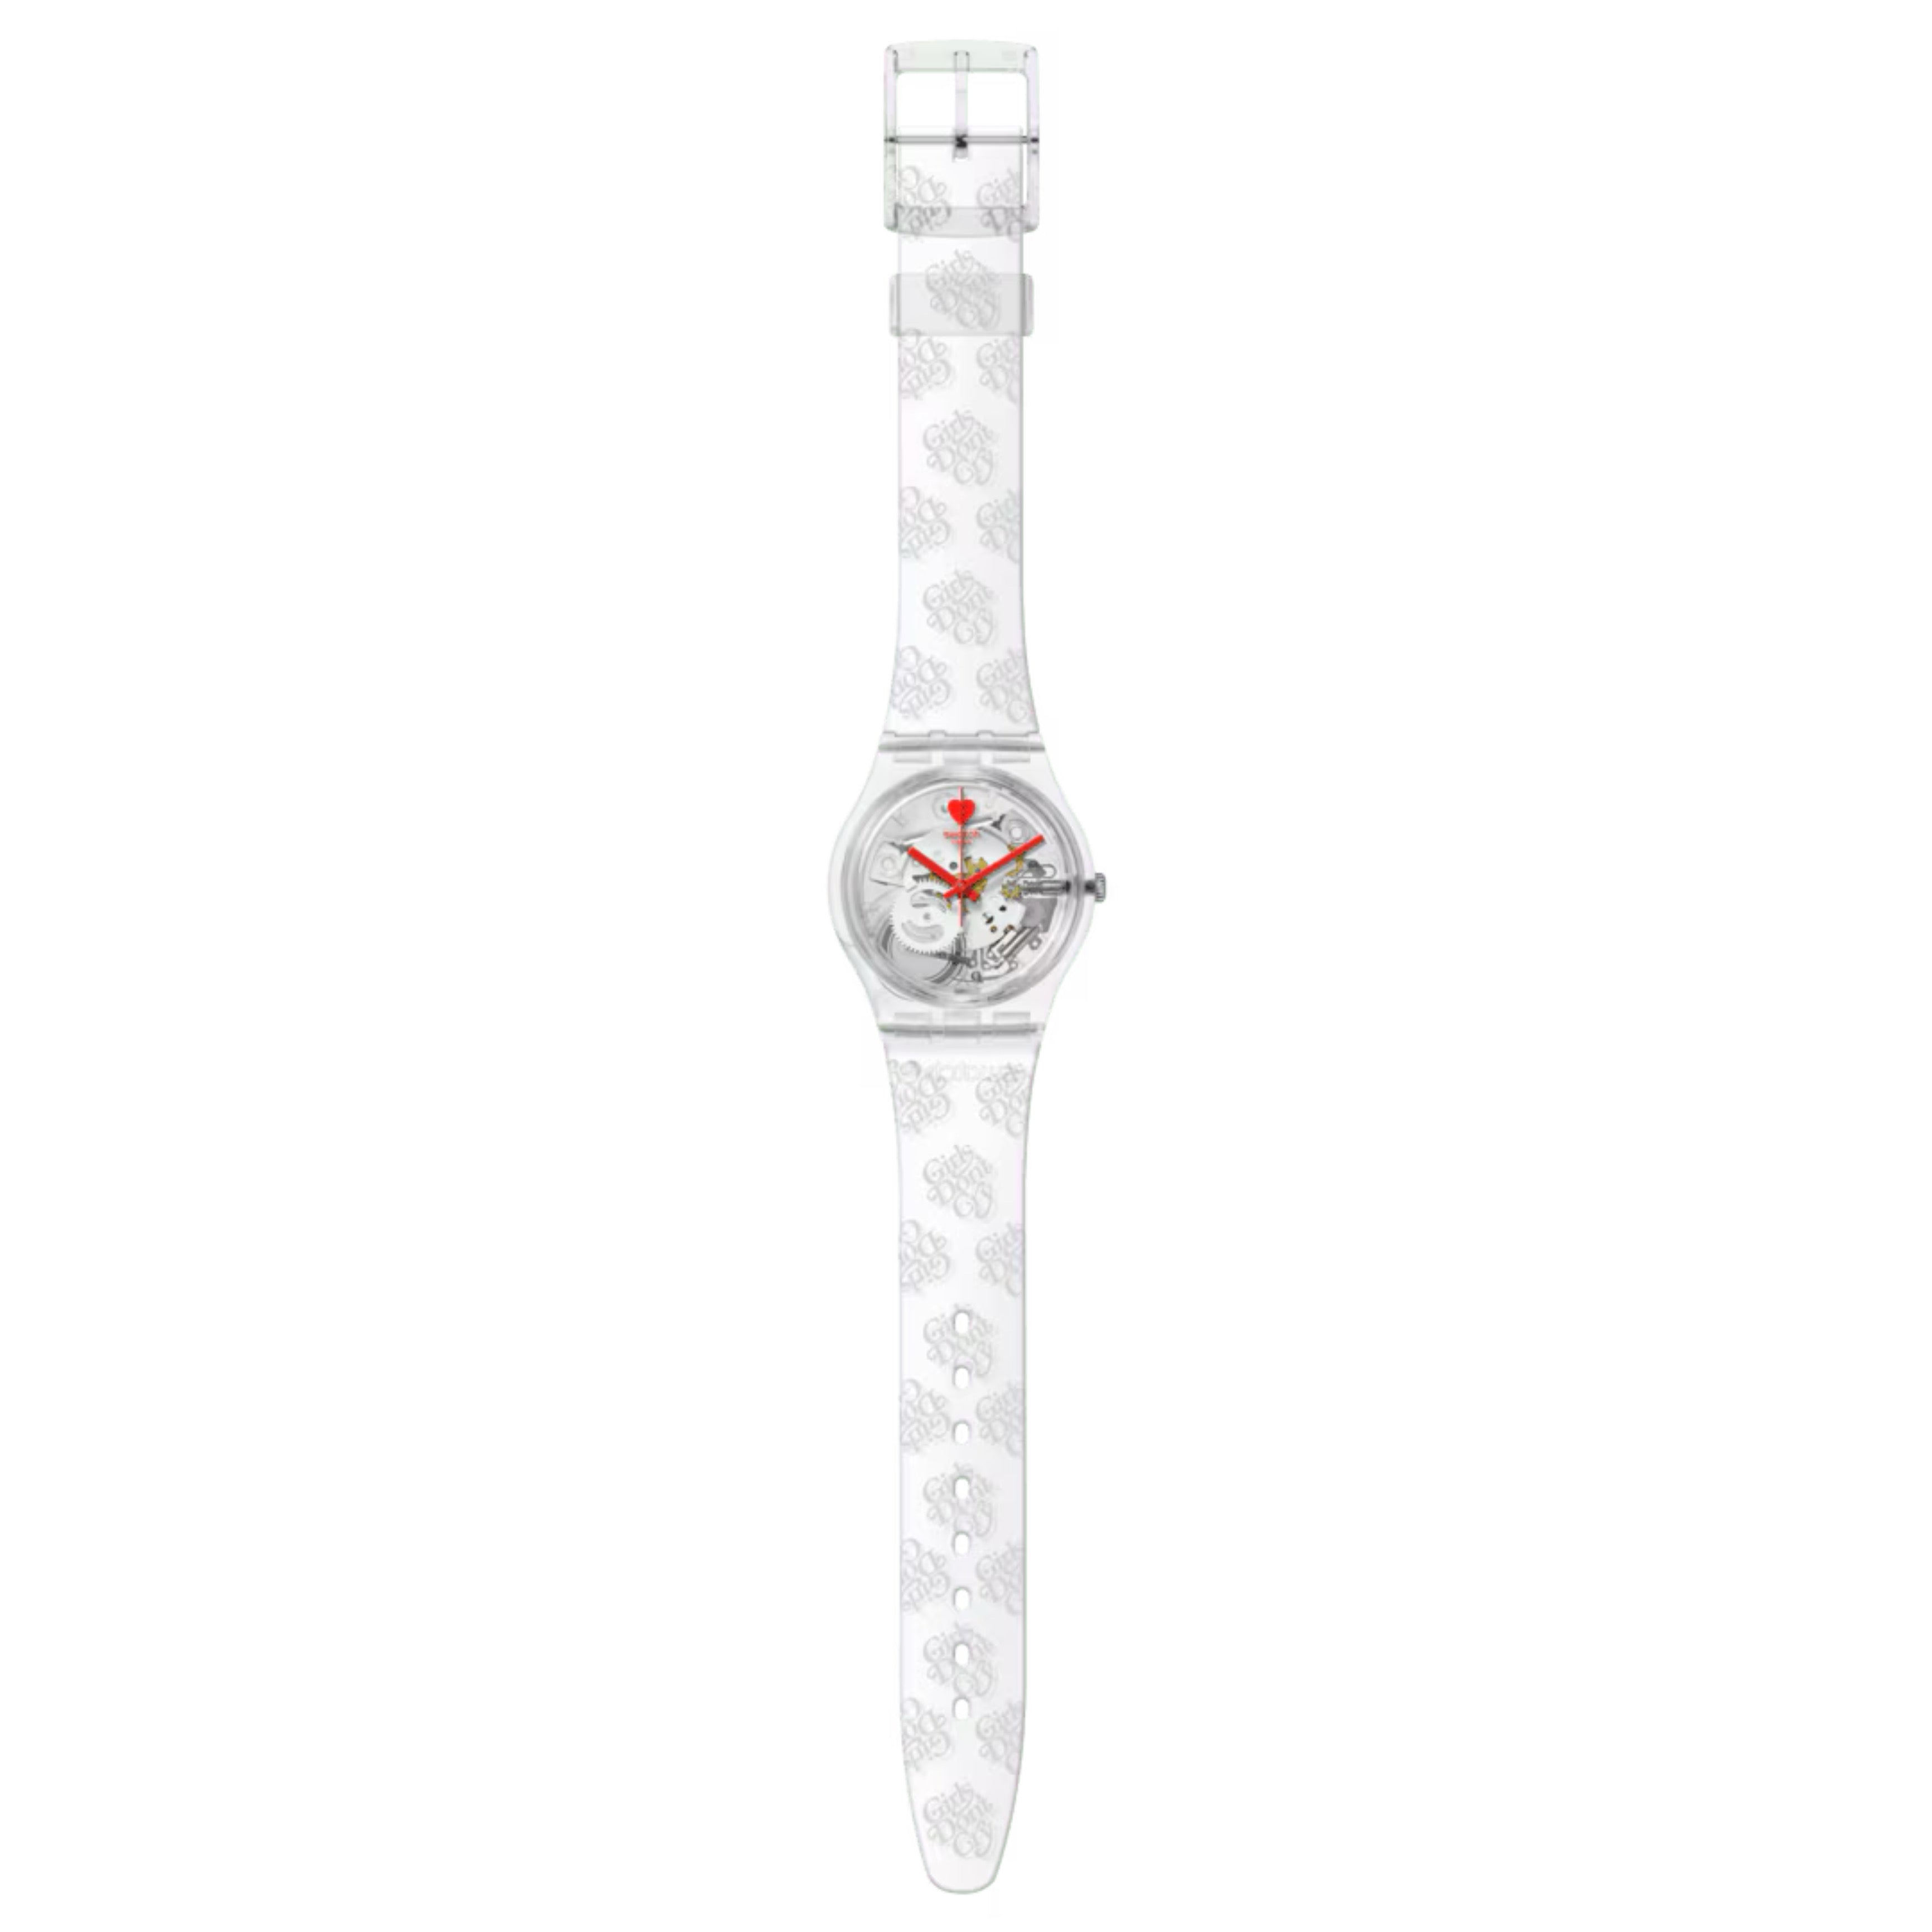 SWATCH Girls Don't Cry By VERDY